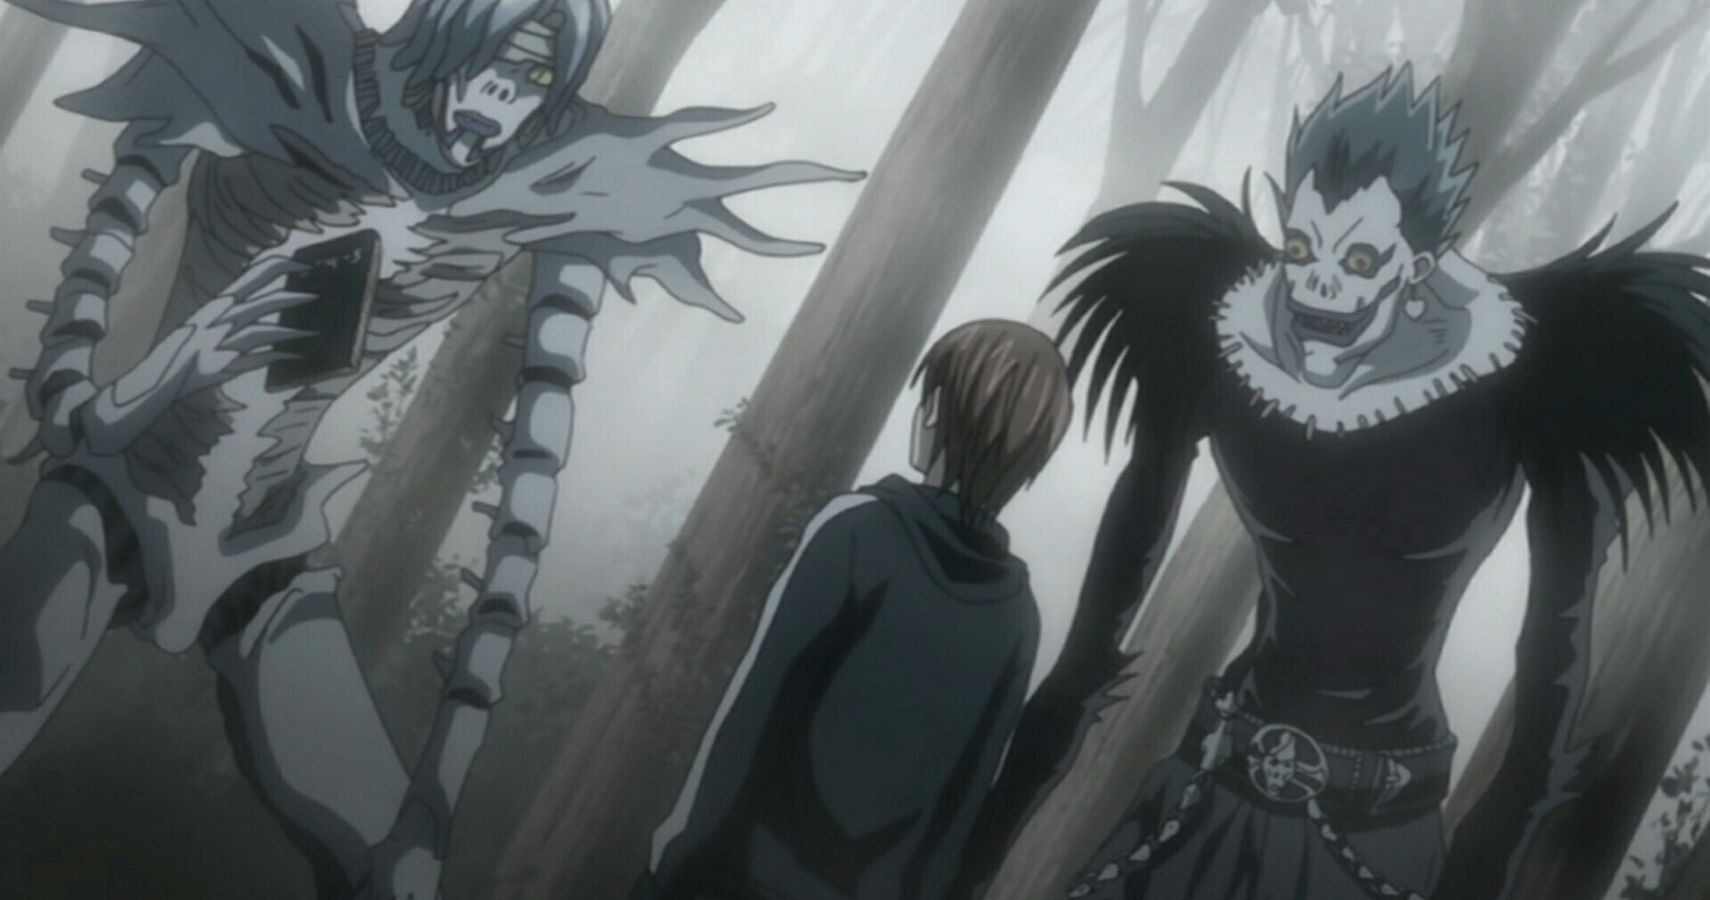 Death Note 10 Hidden Details About The Main Characters In The Anime Everyone Missed